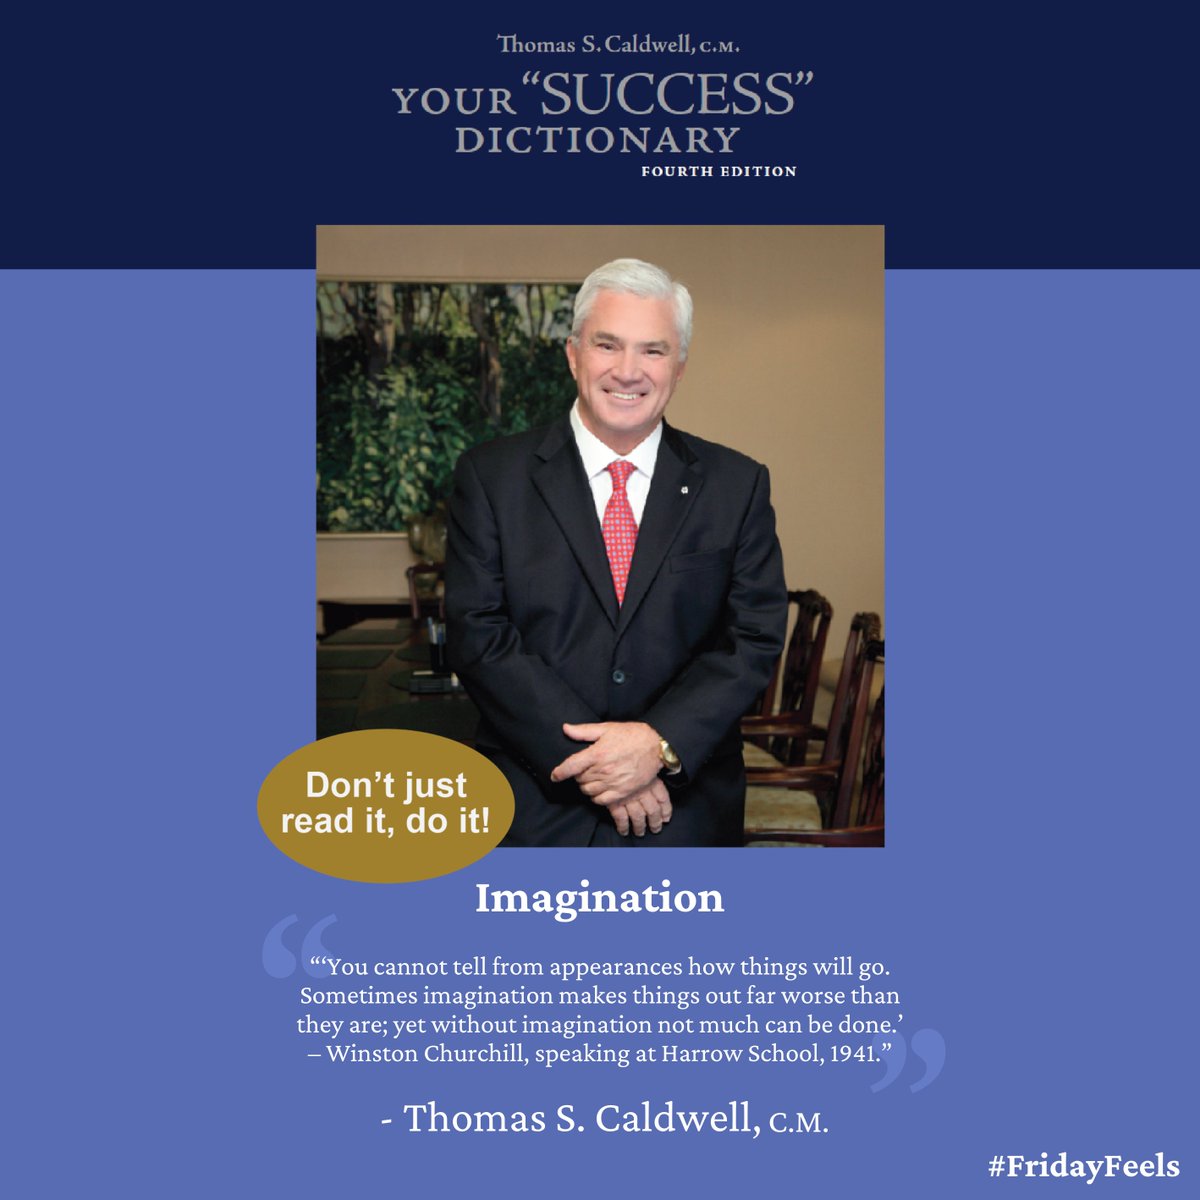 Your #FridayFeels word of the day – Imagination

#YourSuccessDictionary #ThomasSCaldwell #Friday #Feels #Feeling #Success #SuccessDictionary